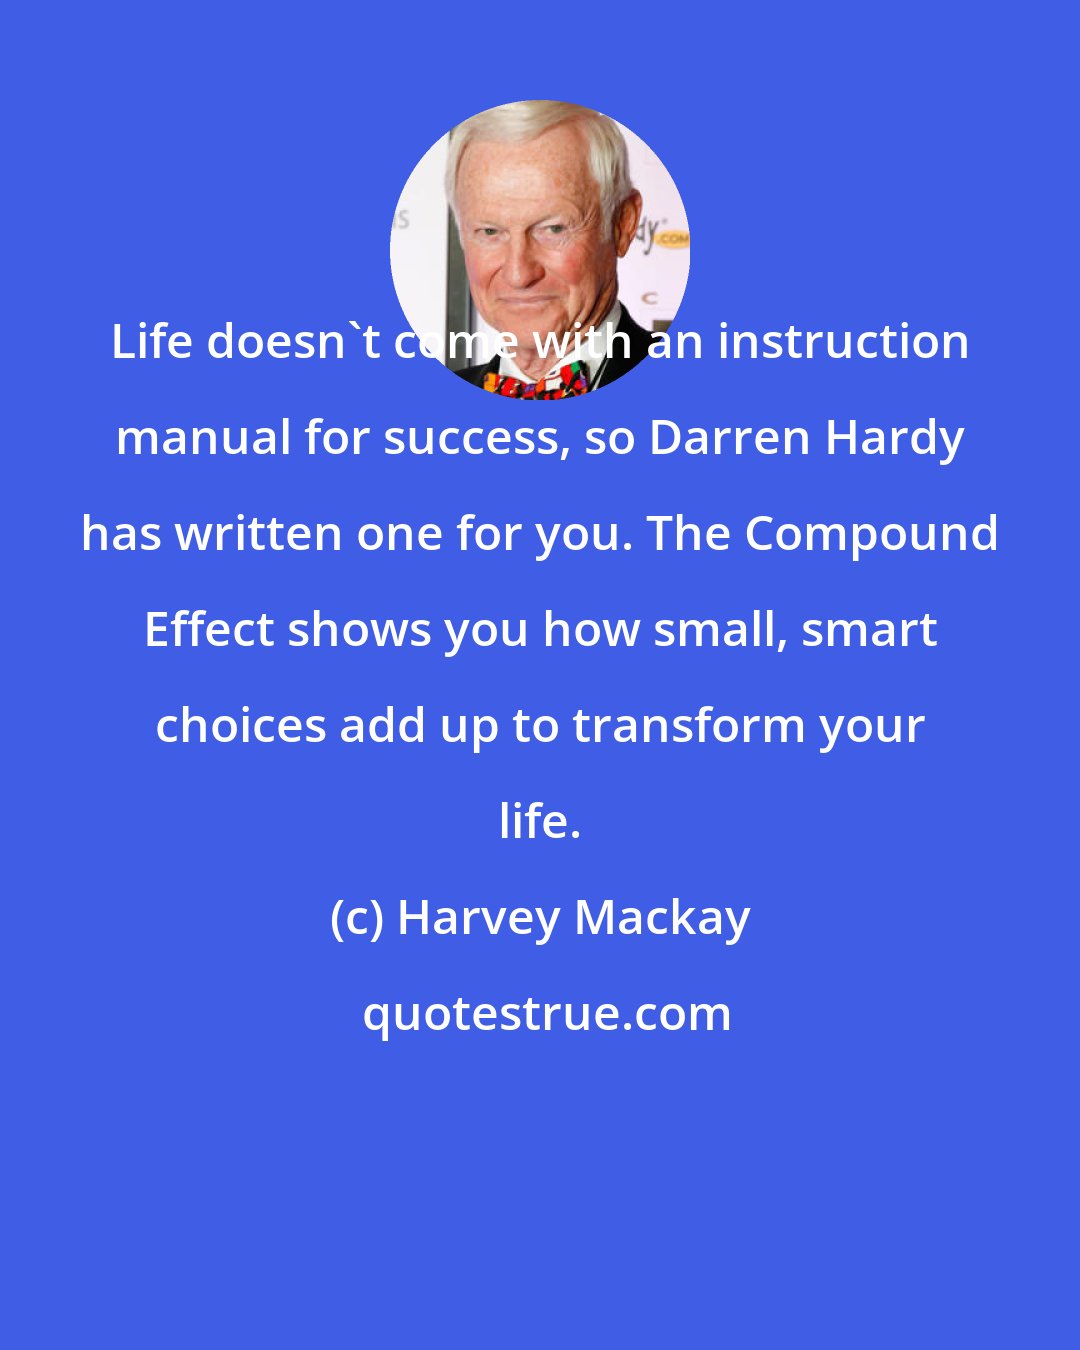 Harvey Mackay: Life doesn't come with an instruction manual for success, so Darren Hardy has written one for you. The Compound Effect shows you how small, smart choices add up to transform your life.